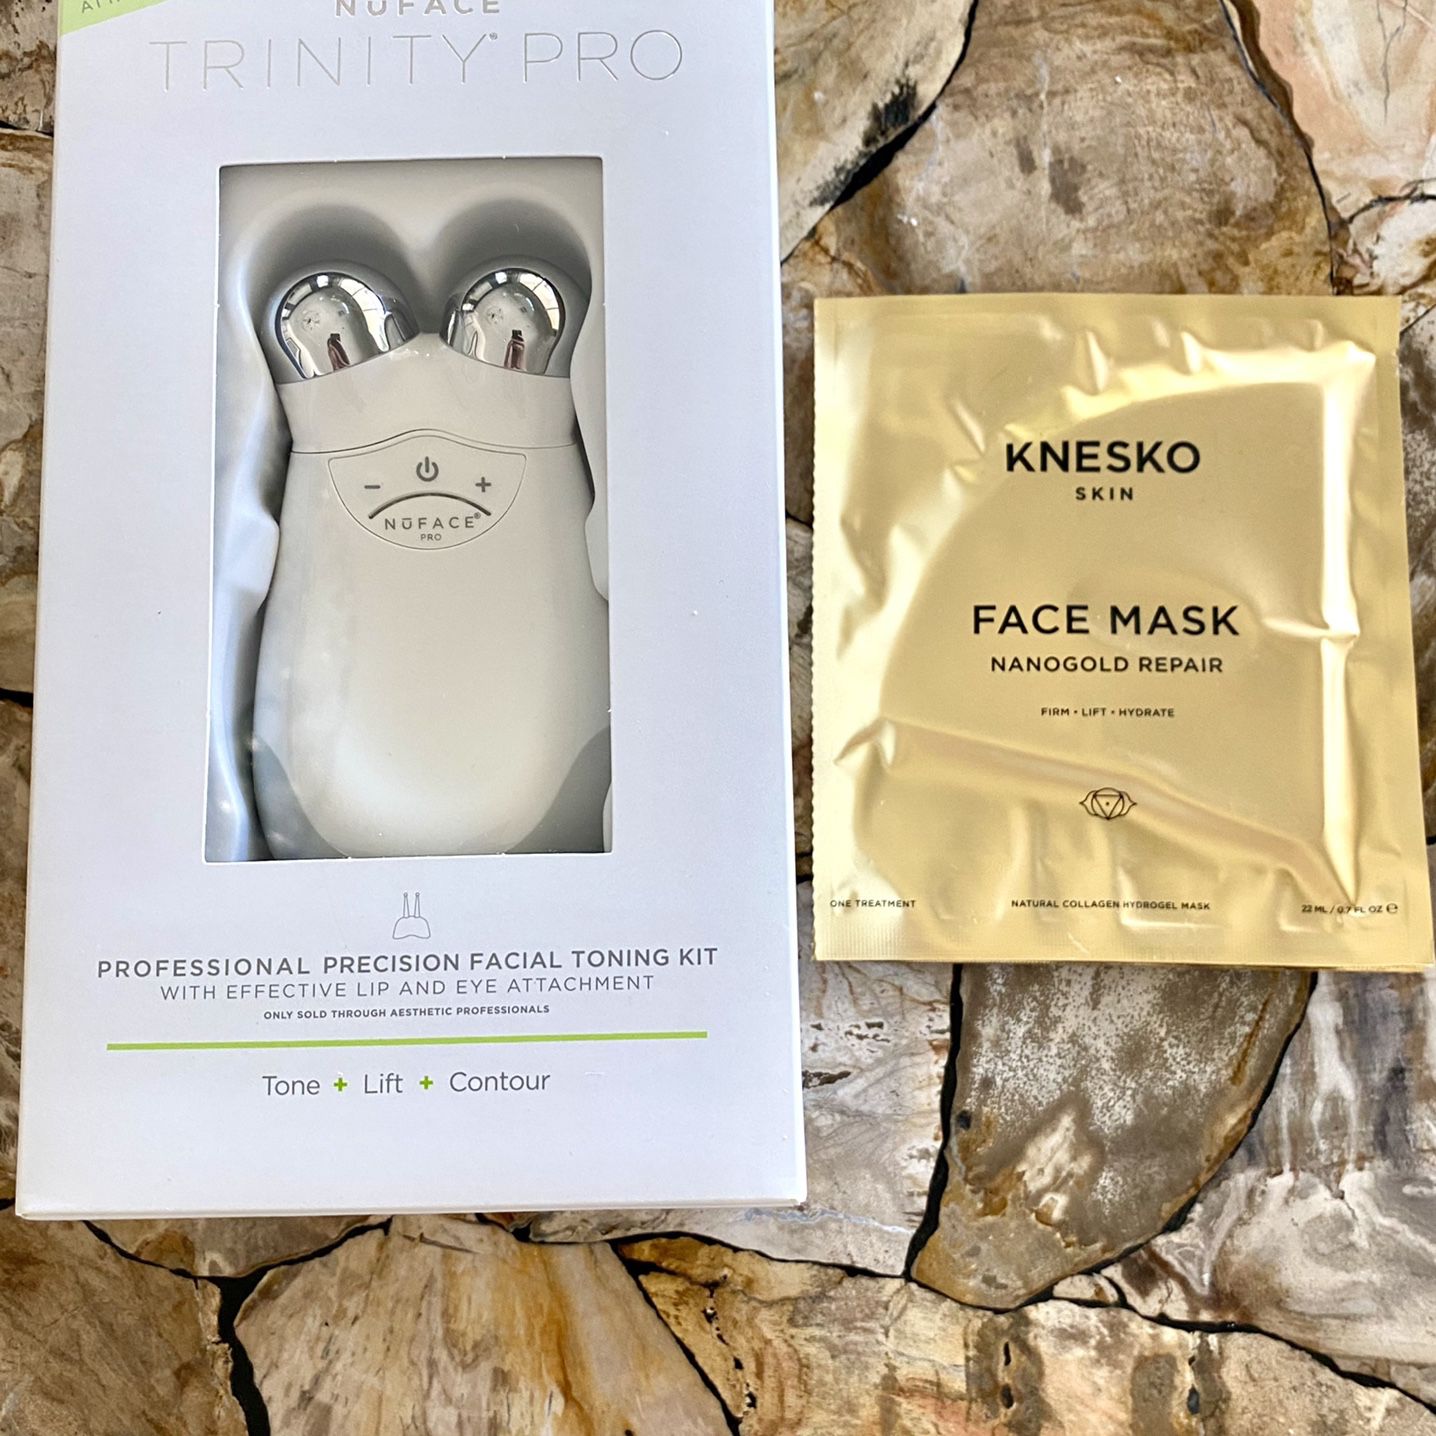 NEW NuFace Trinity Pro Microcurrent Kit w/Lip & Eye Attachment & FREE Knesko Gold Collagen Face Mask